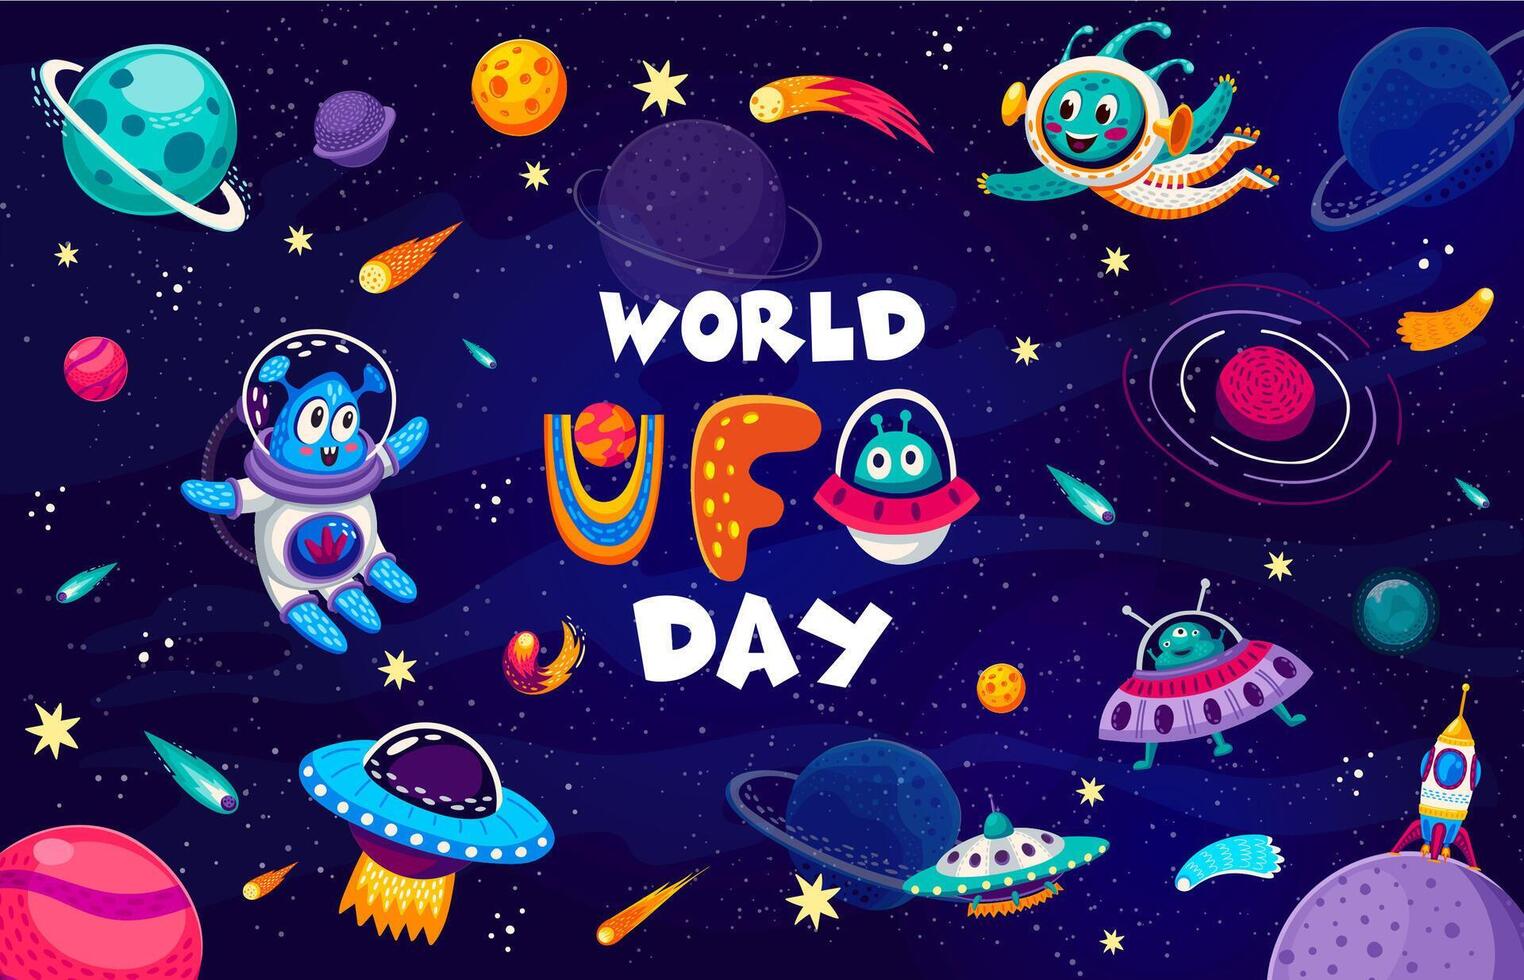 World UFO Day poster with cute alien, spaceship vector